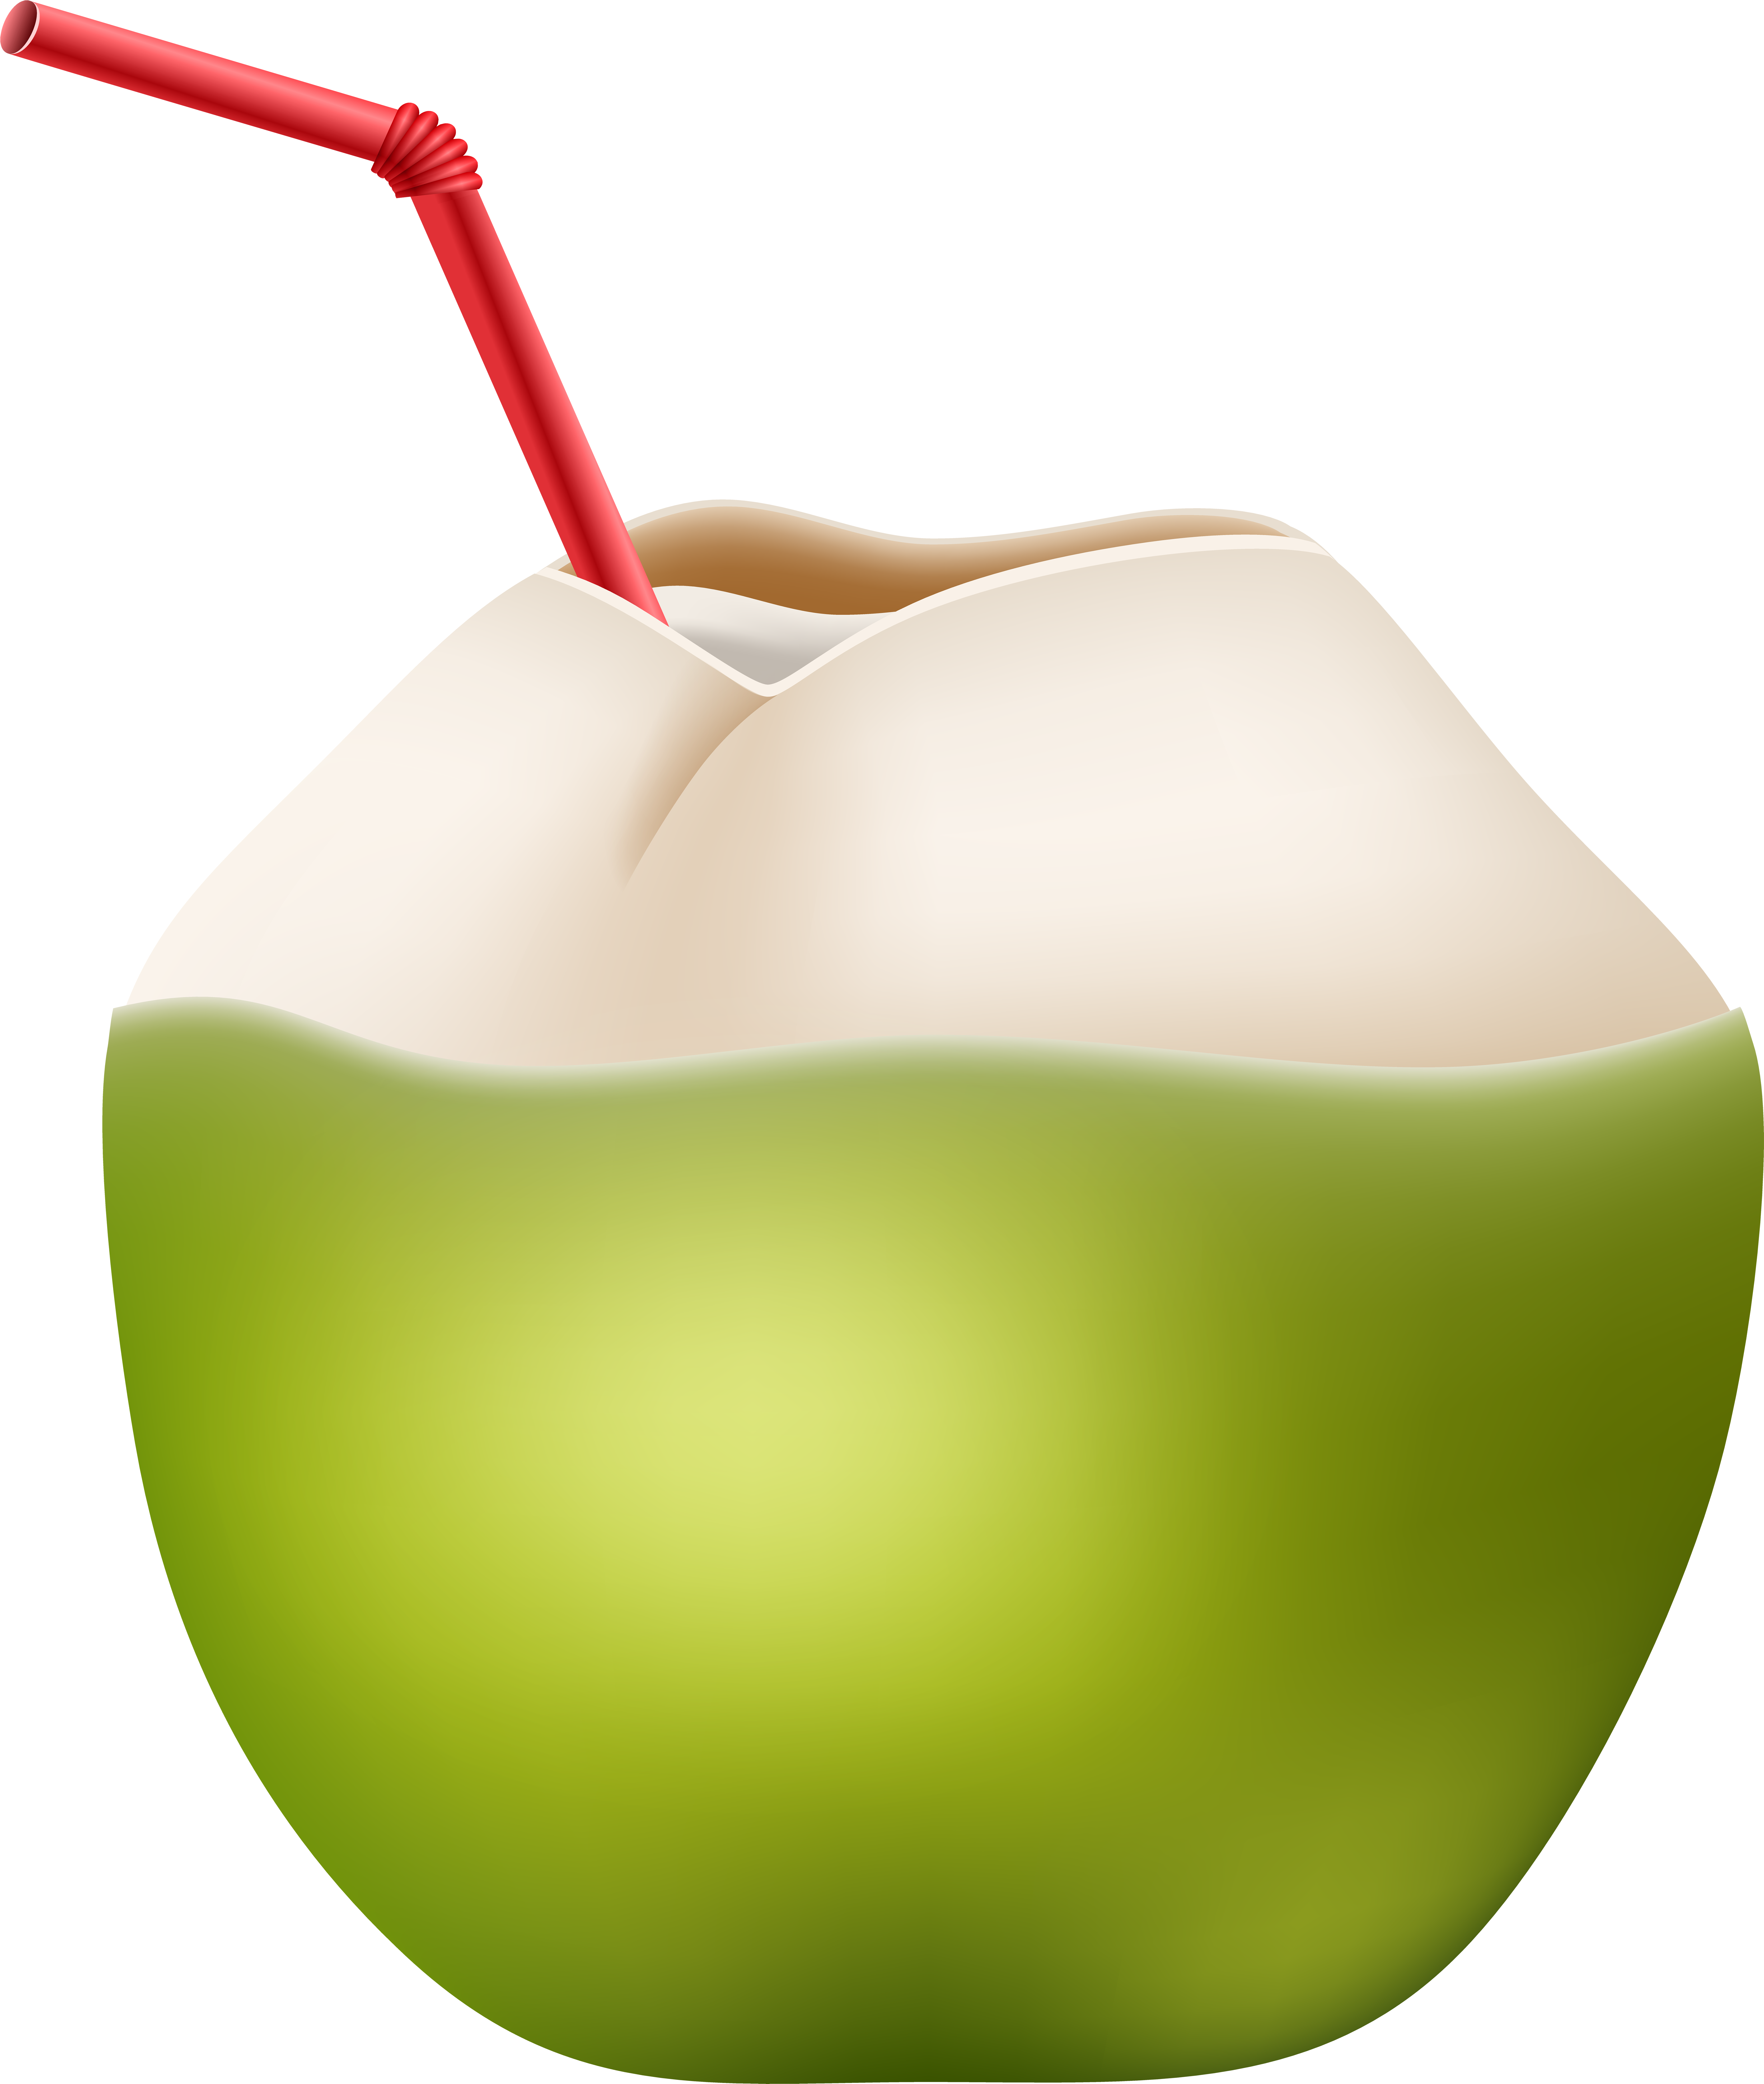 A Green Coconut With A Straw Inside